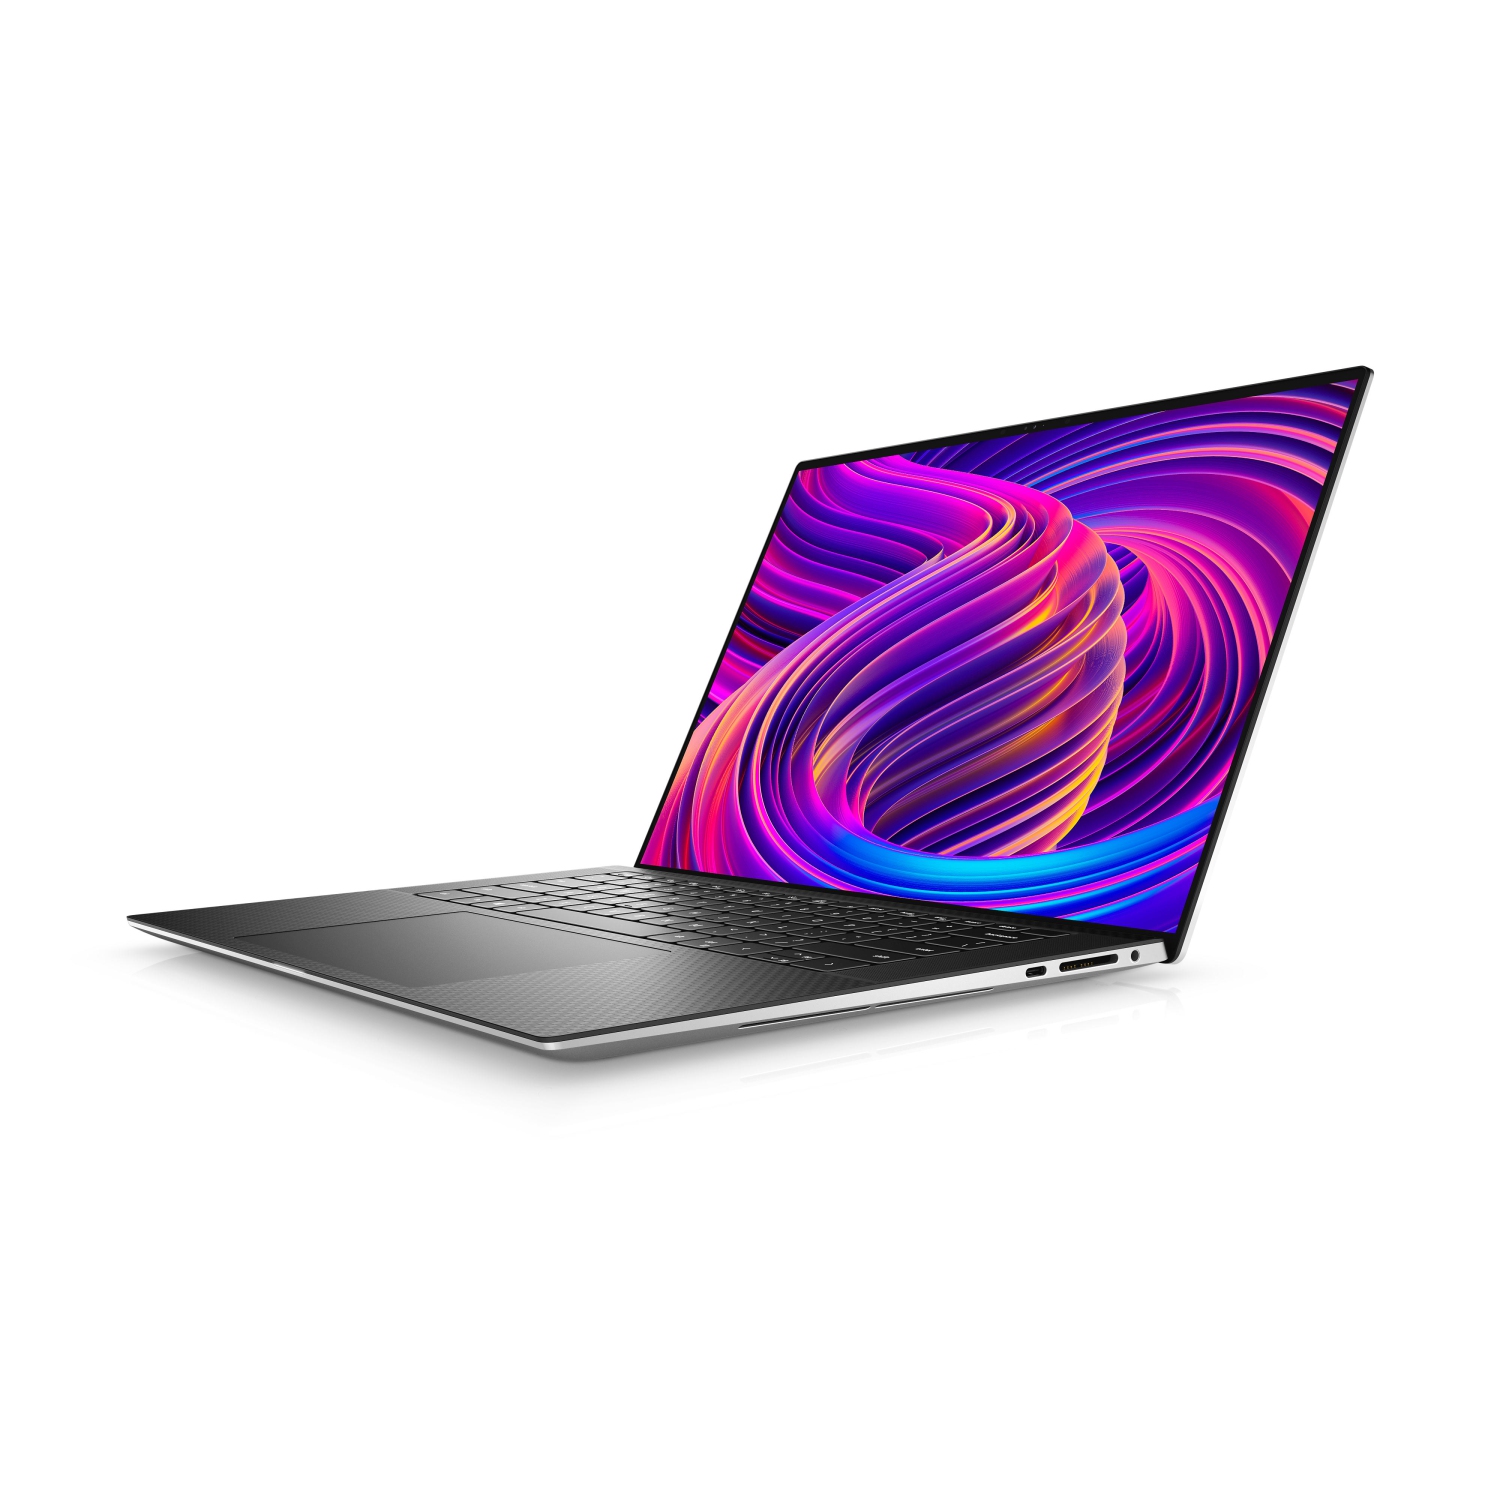 Refurbished (Excellent) - Dell XPS 15 9510 Laptop (2021), 15.6" 4K Touch, Core i9 - 2TB SSD - 32GB RAM - 3050 Ti, 8 Cores @ 4.9 GHz - 11th Gen CPU Certified Refurbished